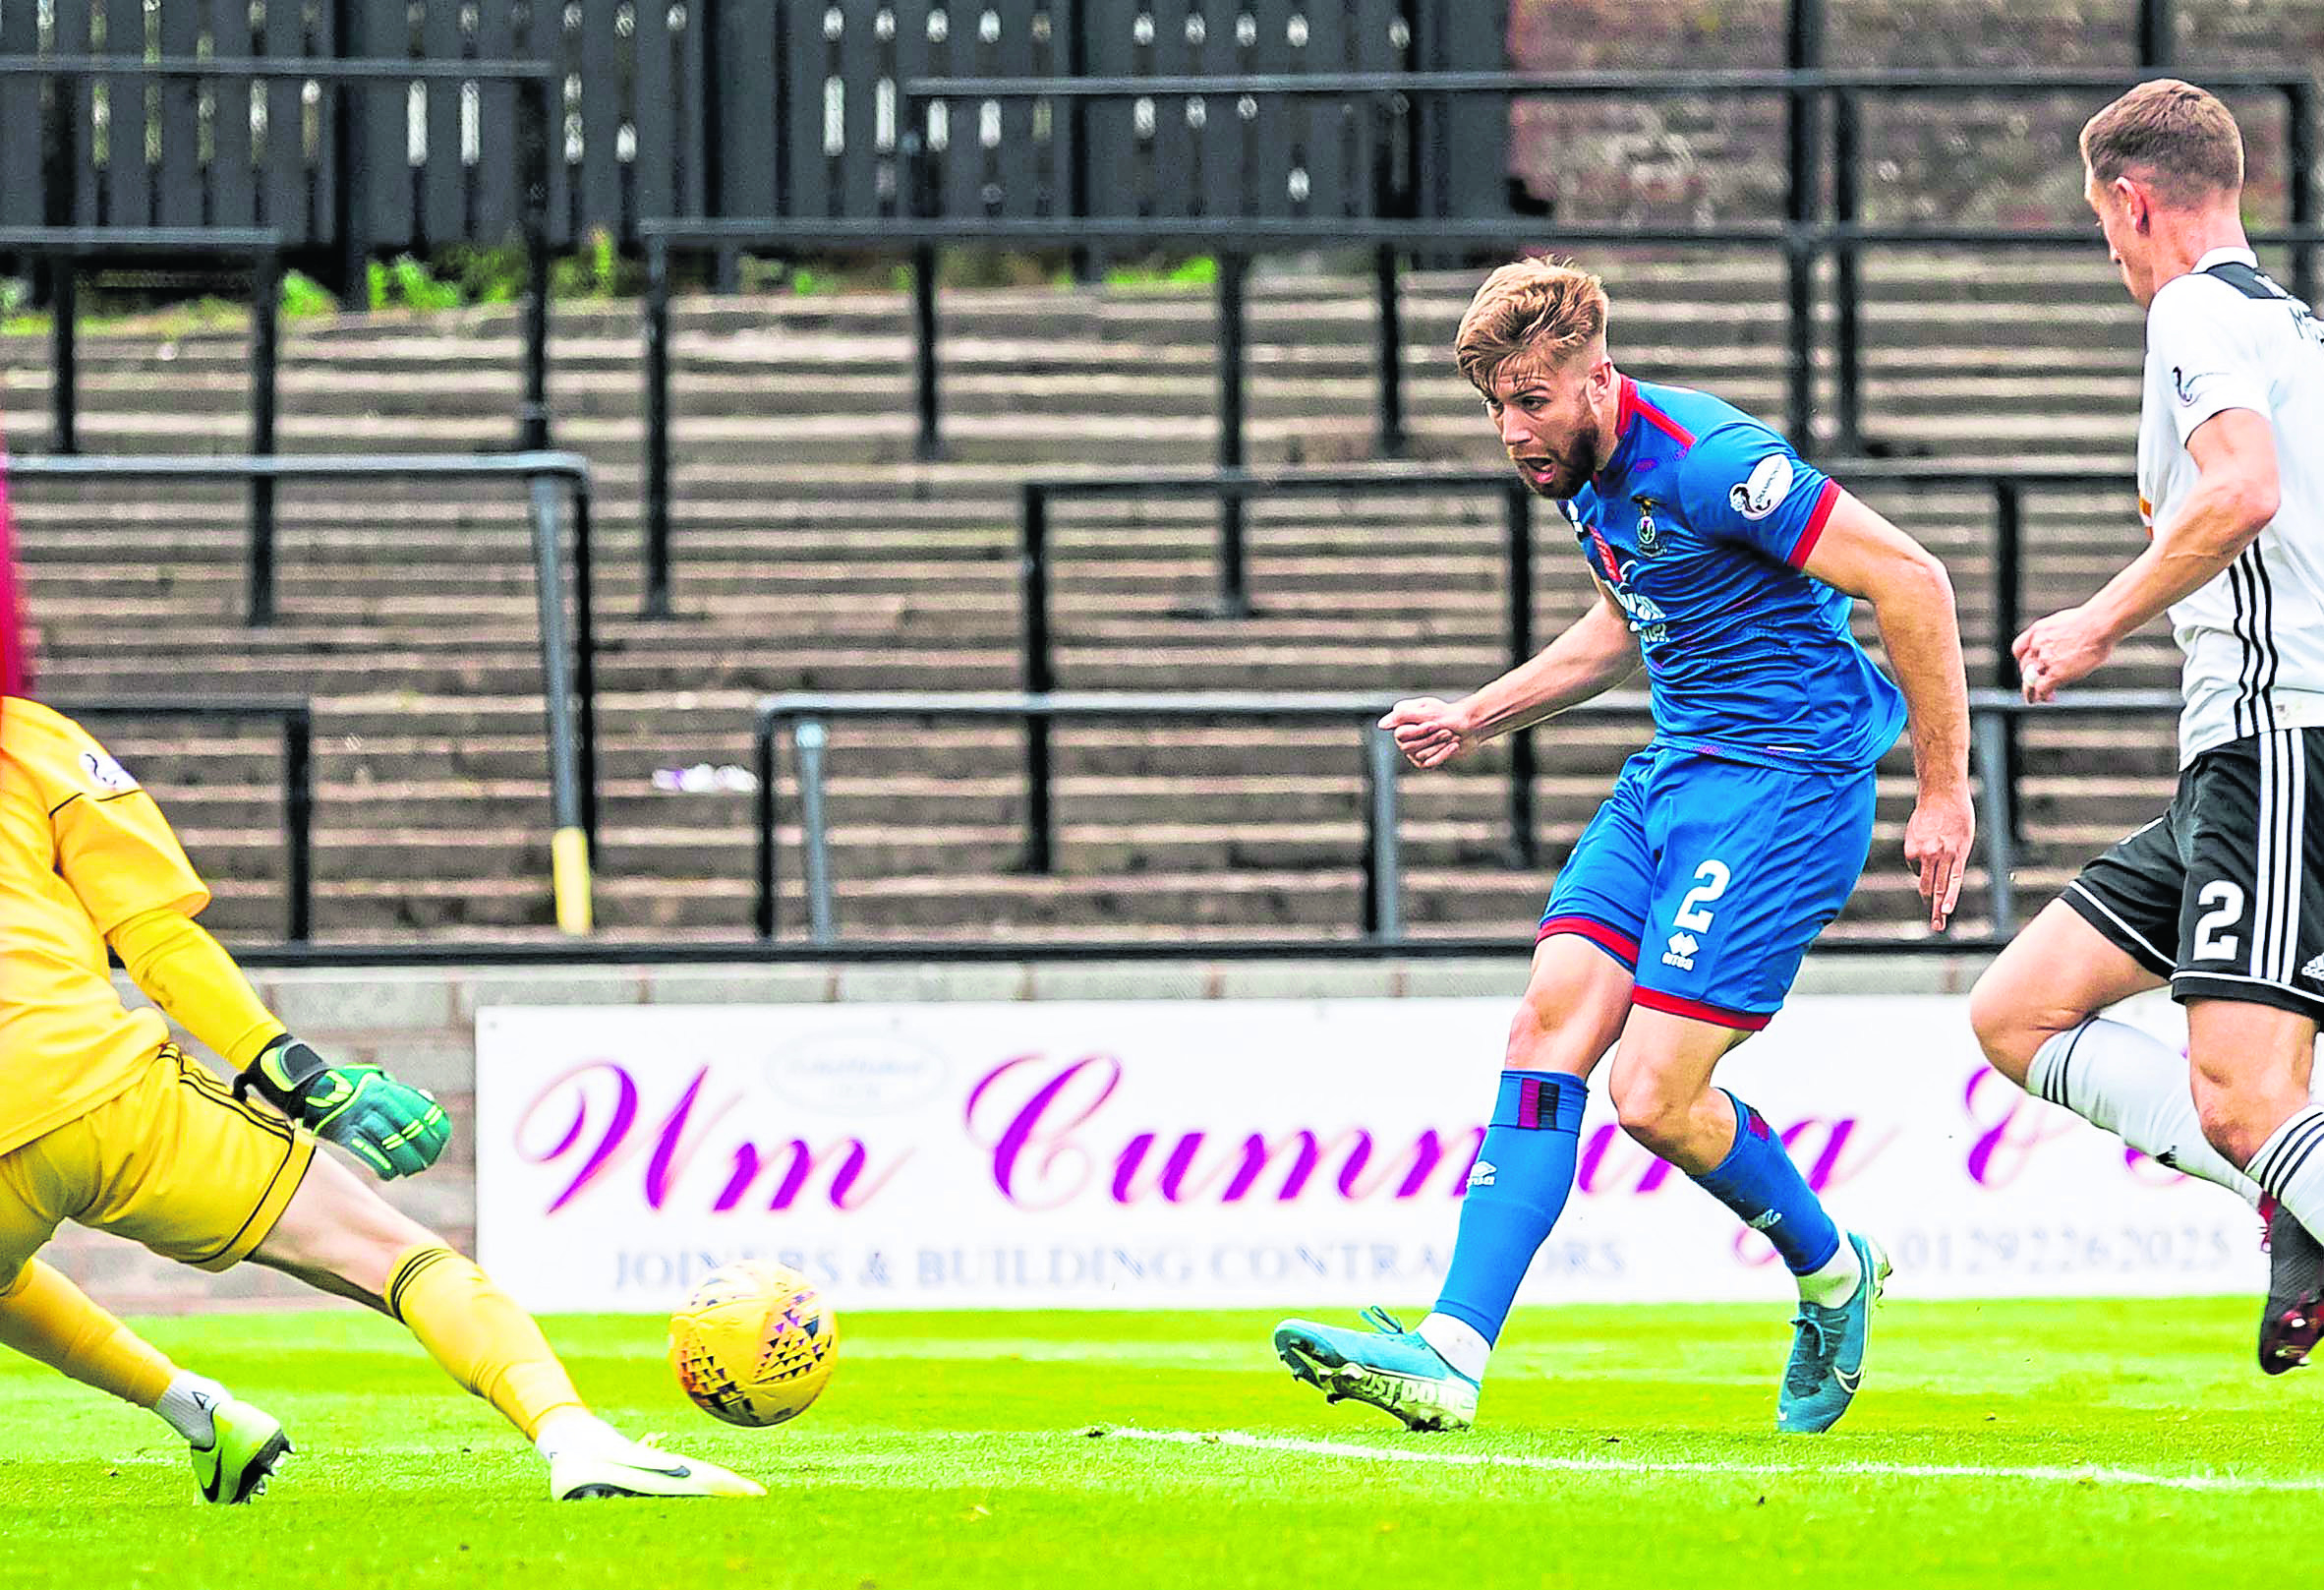 Shaun Rooney scores during the Ladbrokes Championship match between Ayr United and Inverness CT, at Somerset Park. Photo by Roddy Scott/SNS Group.